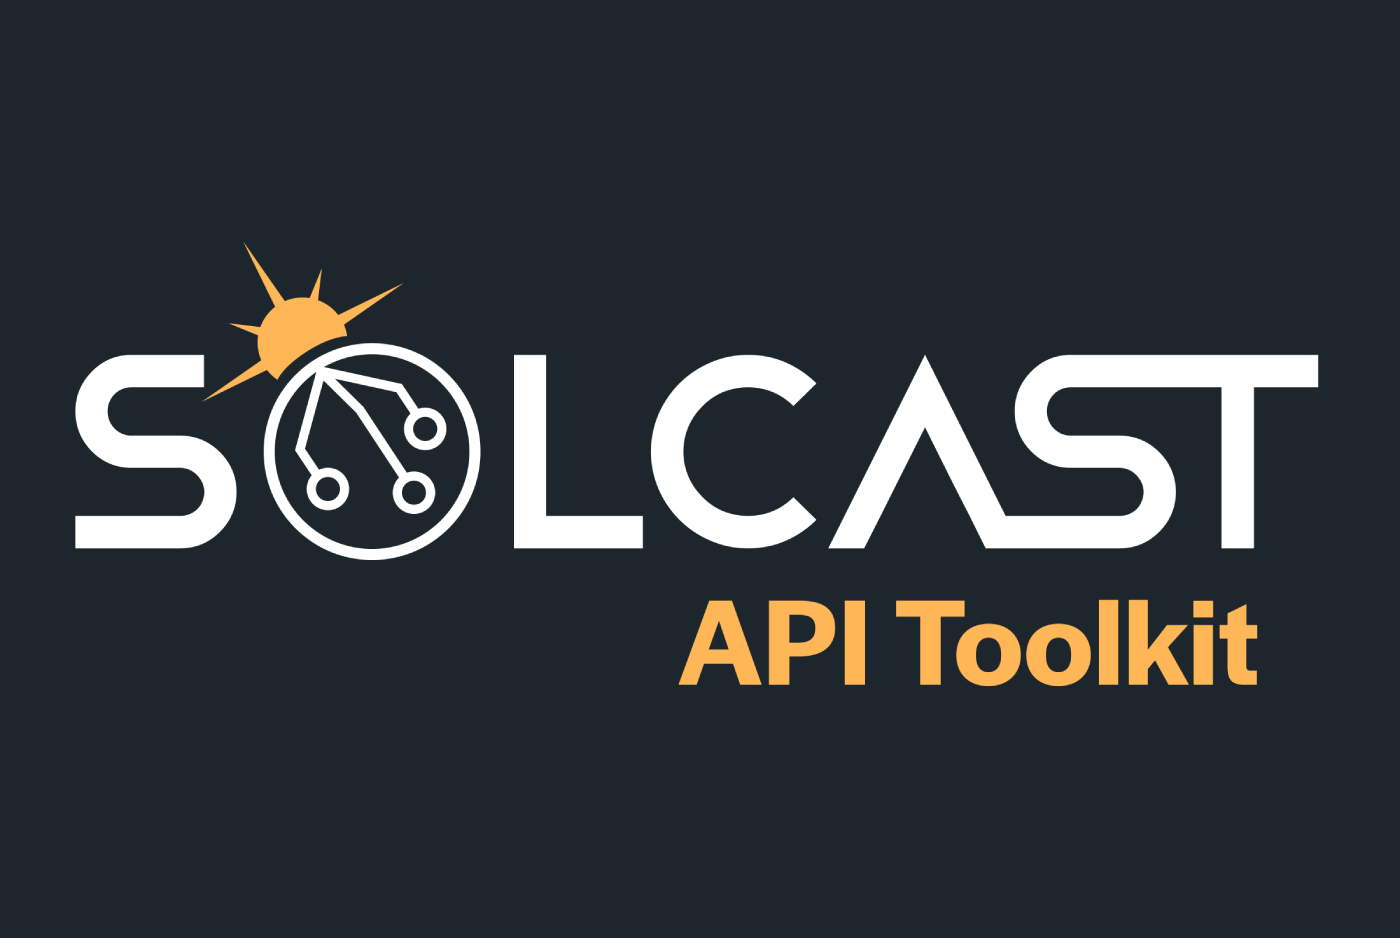 Major update to the Solcast API Toolkit